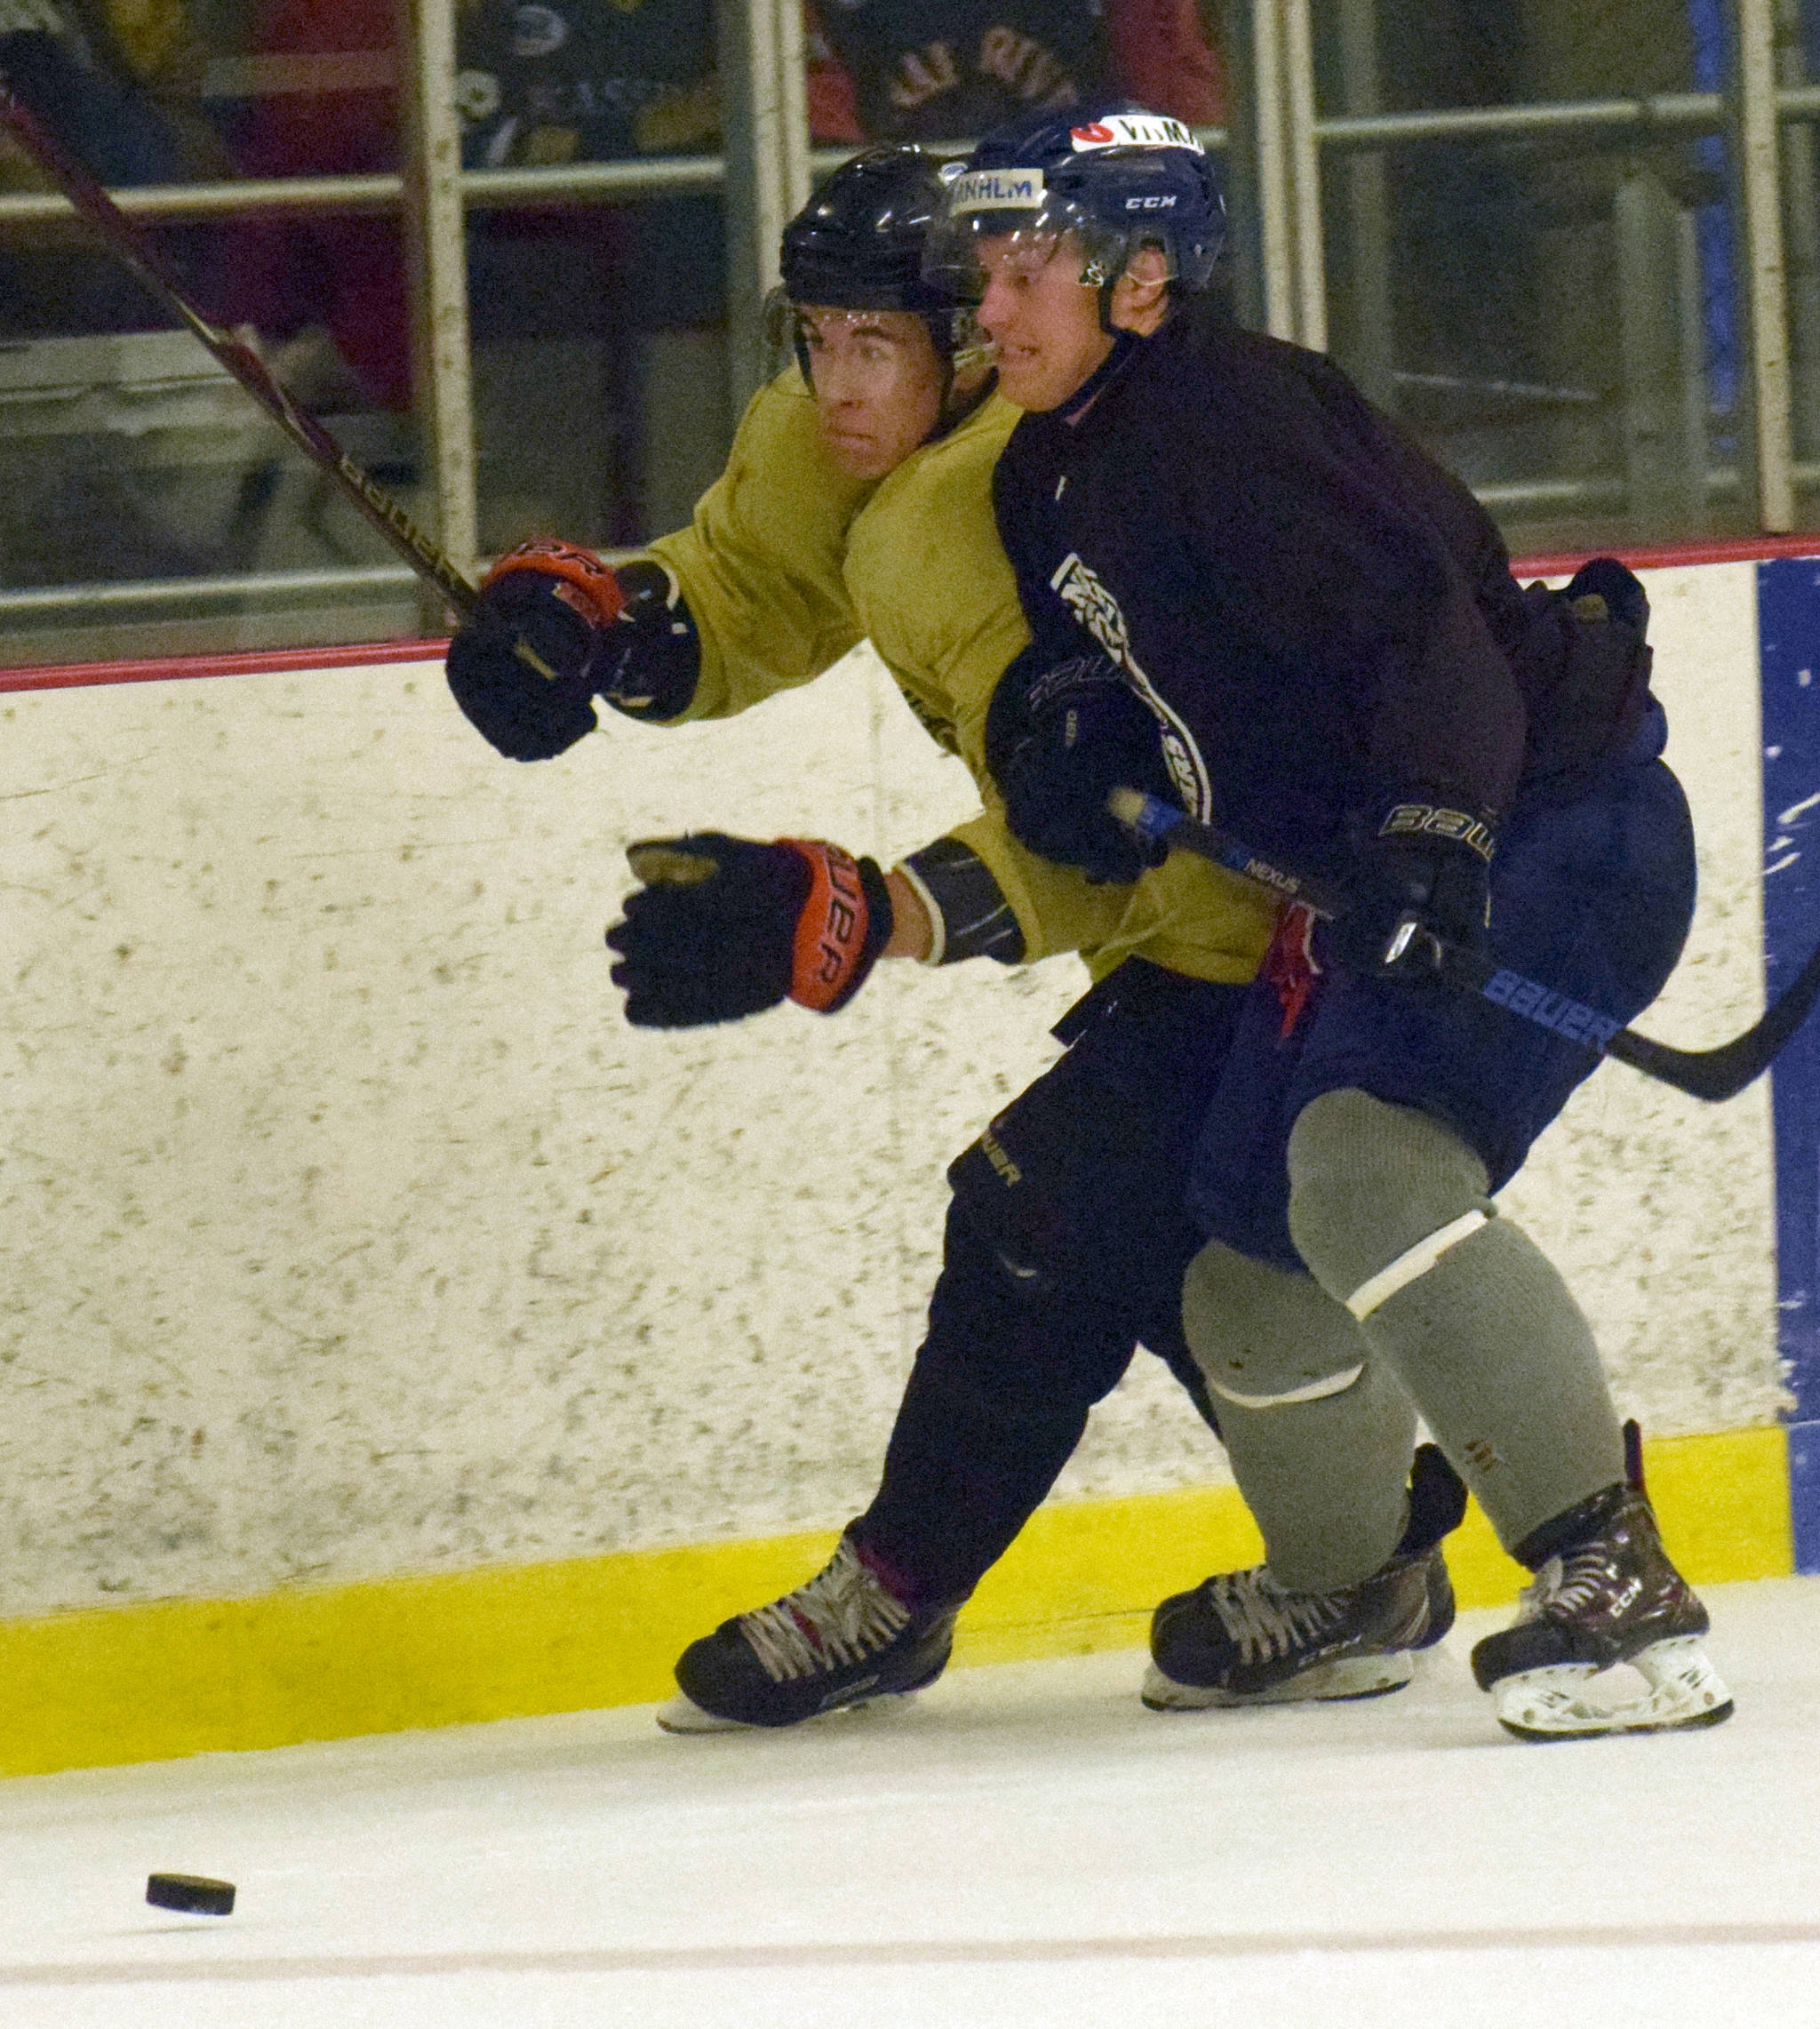 Justin Daly of the Gold and Filip Karlsson of the Brown compete for the puck Friday, Sept. 7, 2018, during the Brown-Gold Game at the Kenai Multi-Purpose Facility. (Photo by Jeff Helminiak/Peninsula Clarion)